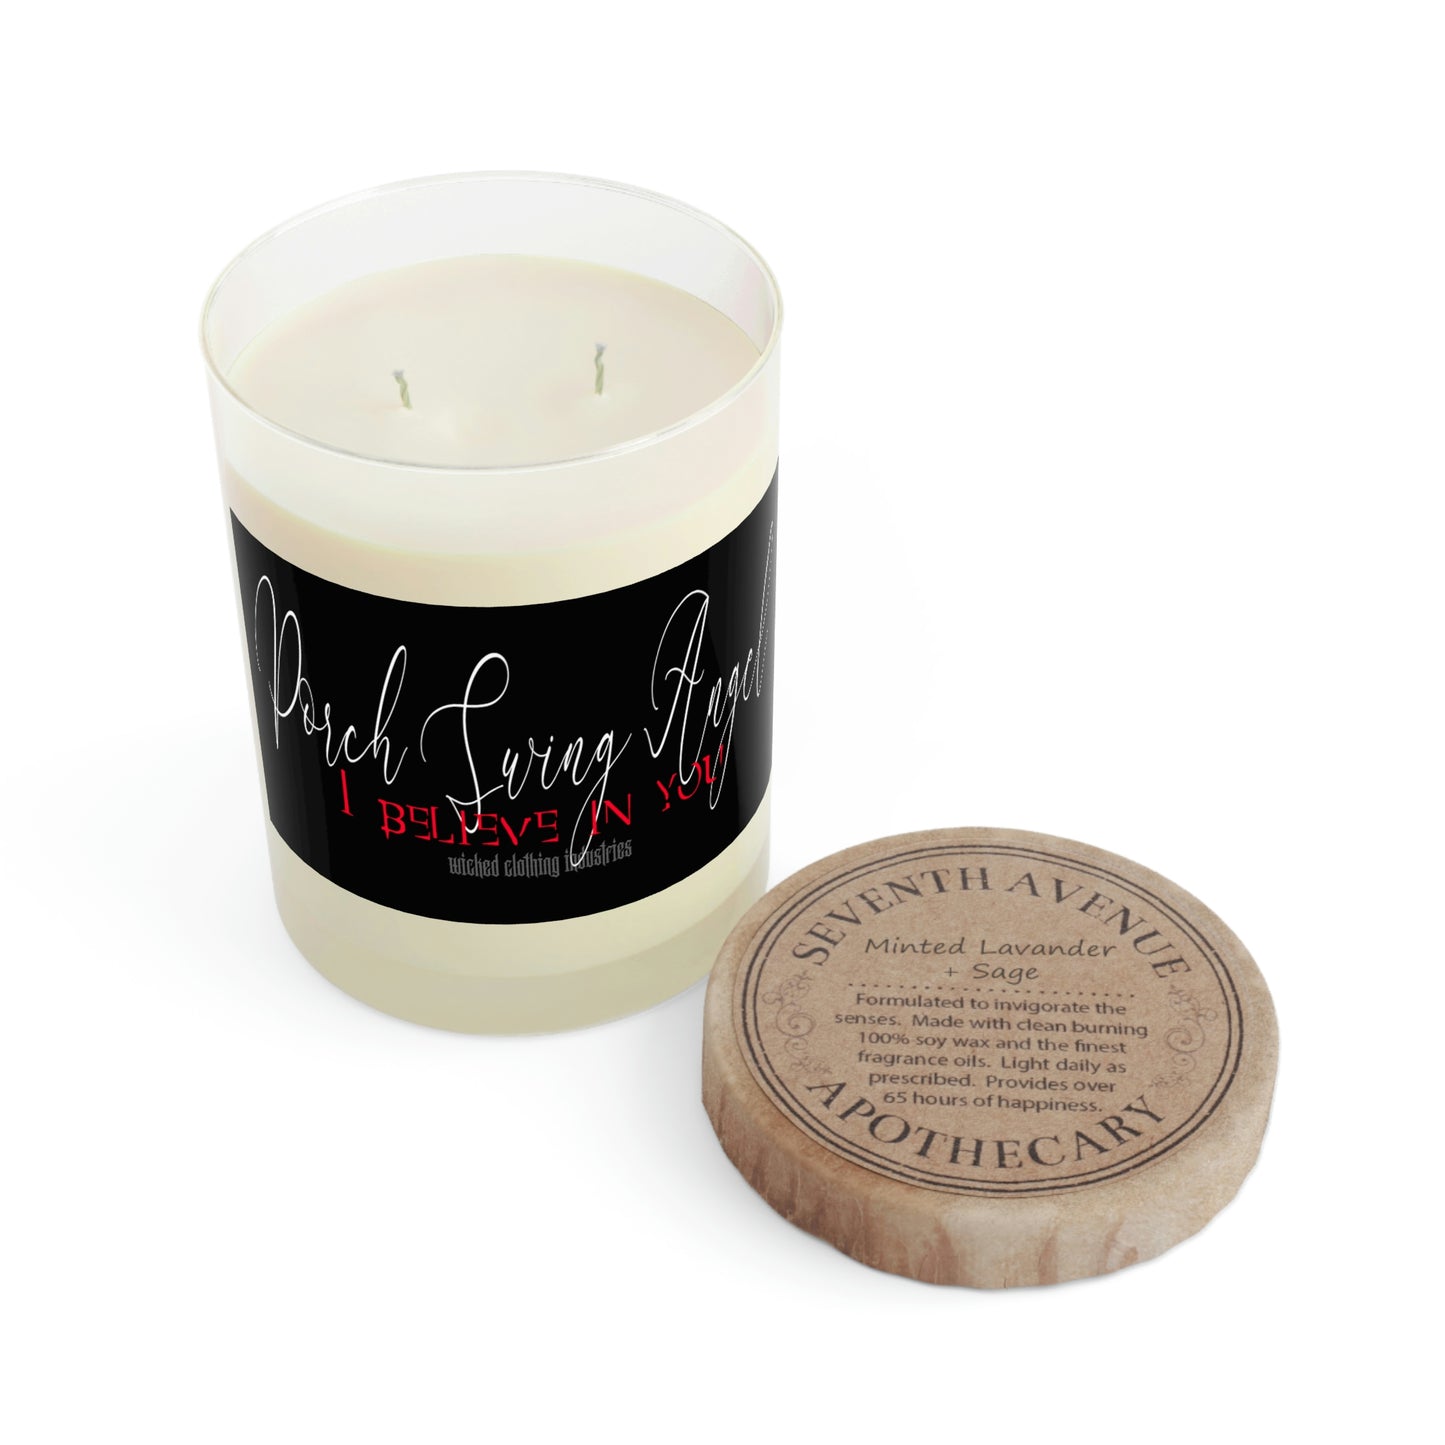 Porch Swing Angel  /Scented Candle, 11oz